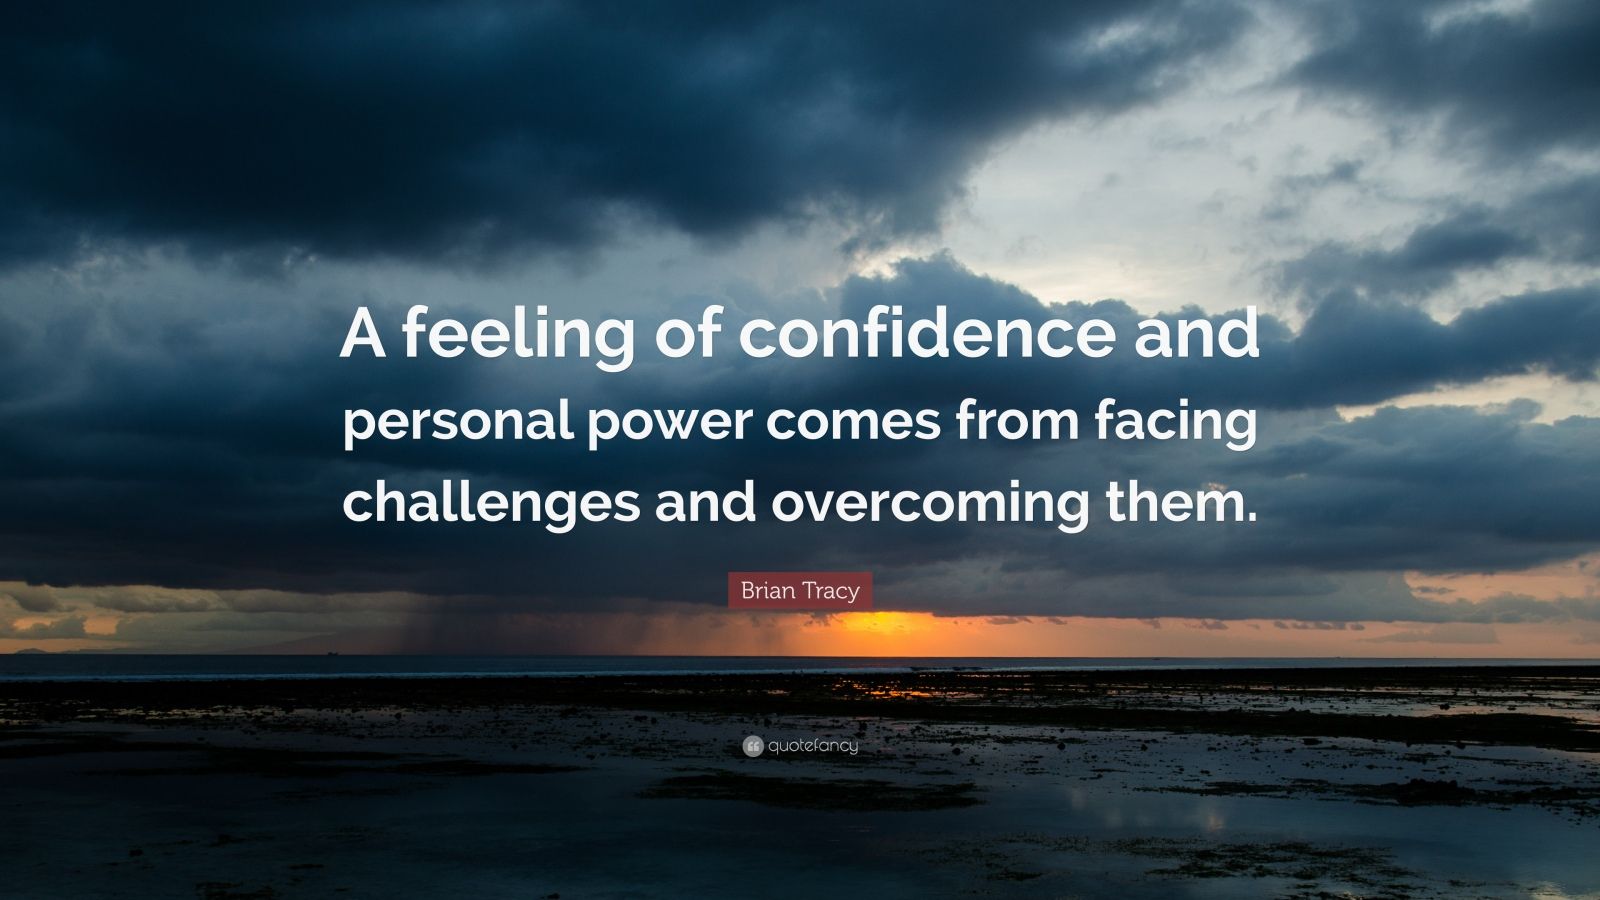 Fighting Quotes About Overcoming Challenges - 11 Quotes To Boost Your Fighting Spirit Because Challenges ... : Overcoming one of my limiting beliefs, girls are not as strong as men, therefore we cannot attempt the same physical challenges.